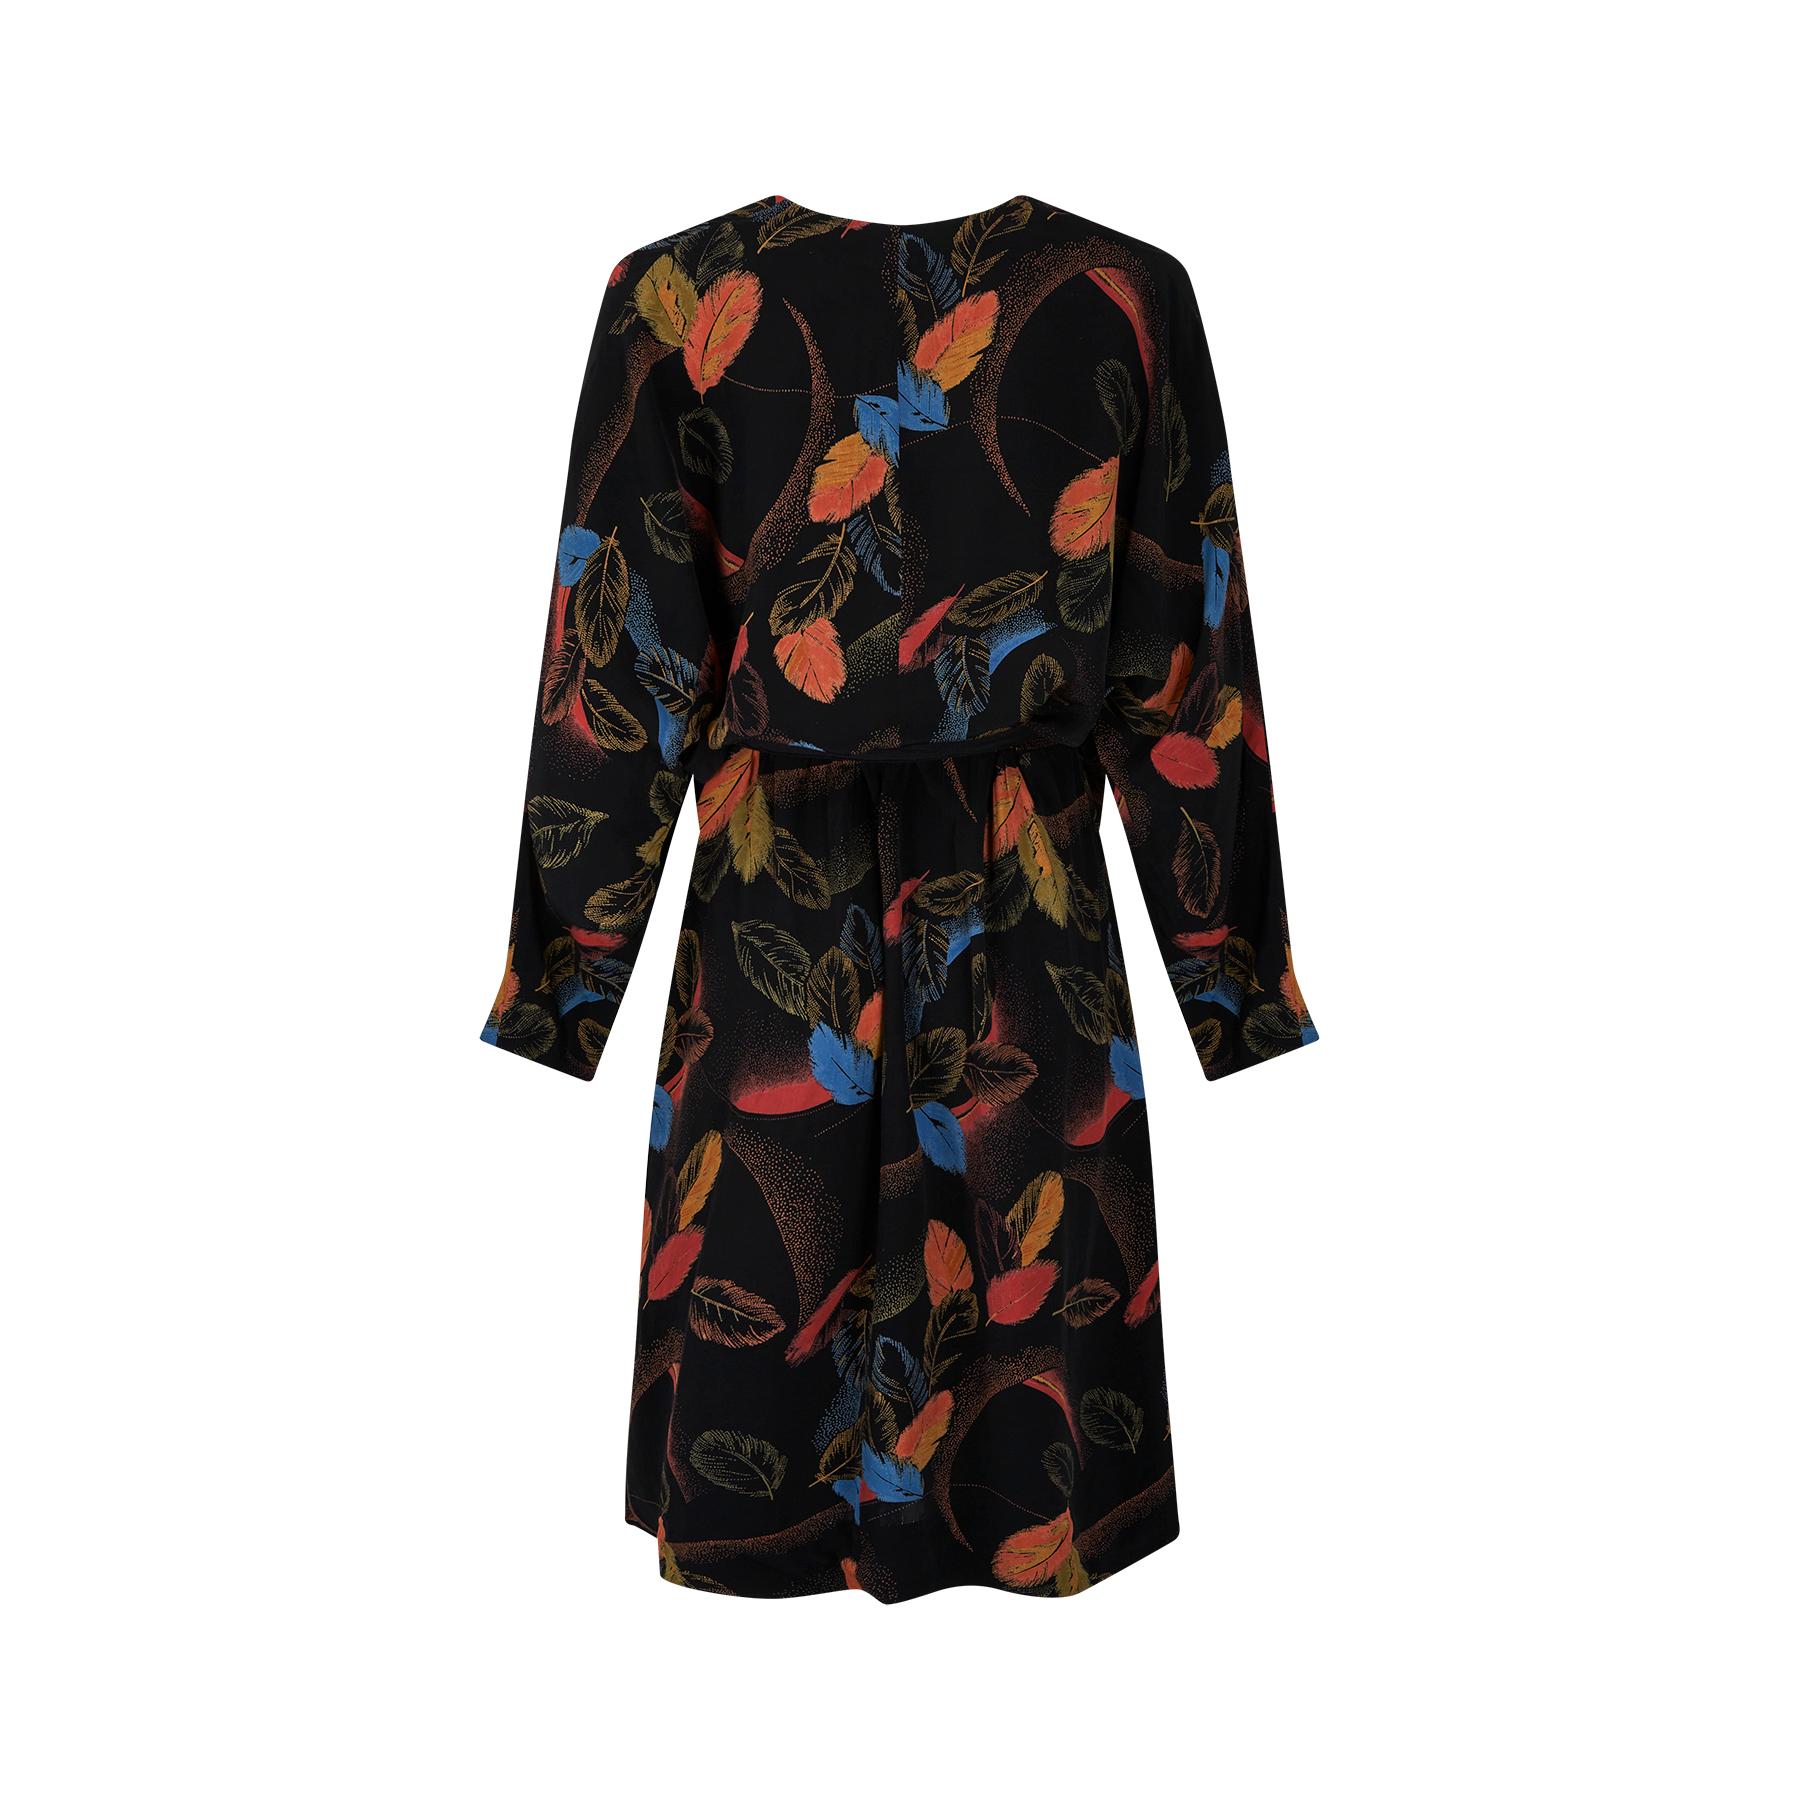 Original cold rayon novelty feather print wrap dress dating to the 1940s. It is in really vibrant colours of orange, yellow and blue against a black background and is a combination of bold block colour feathers and a pixilated more abstract design. 